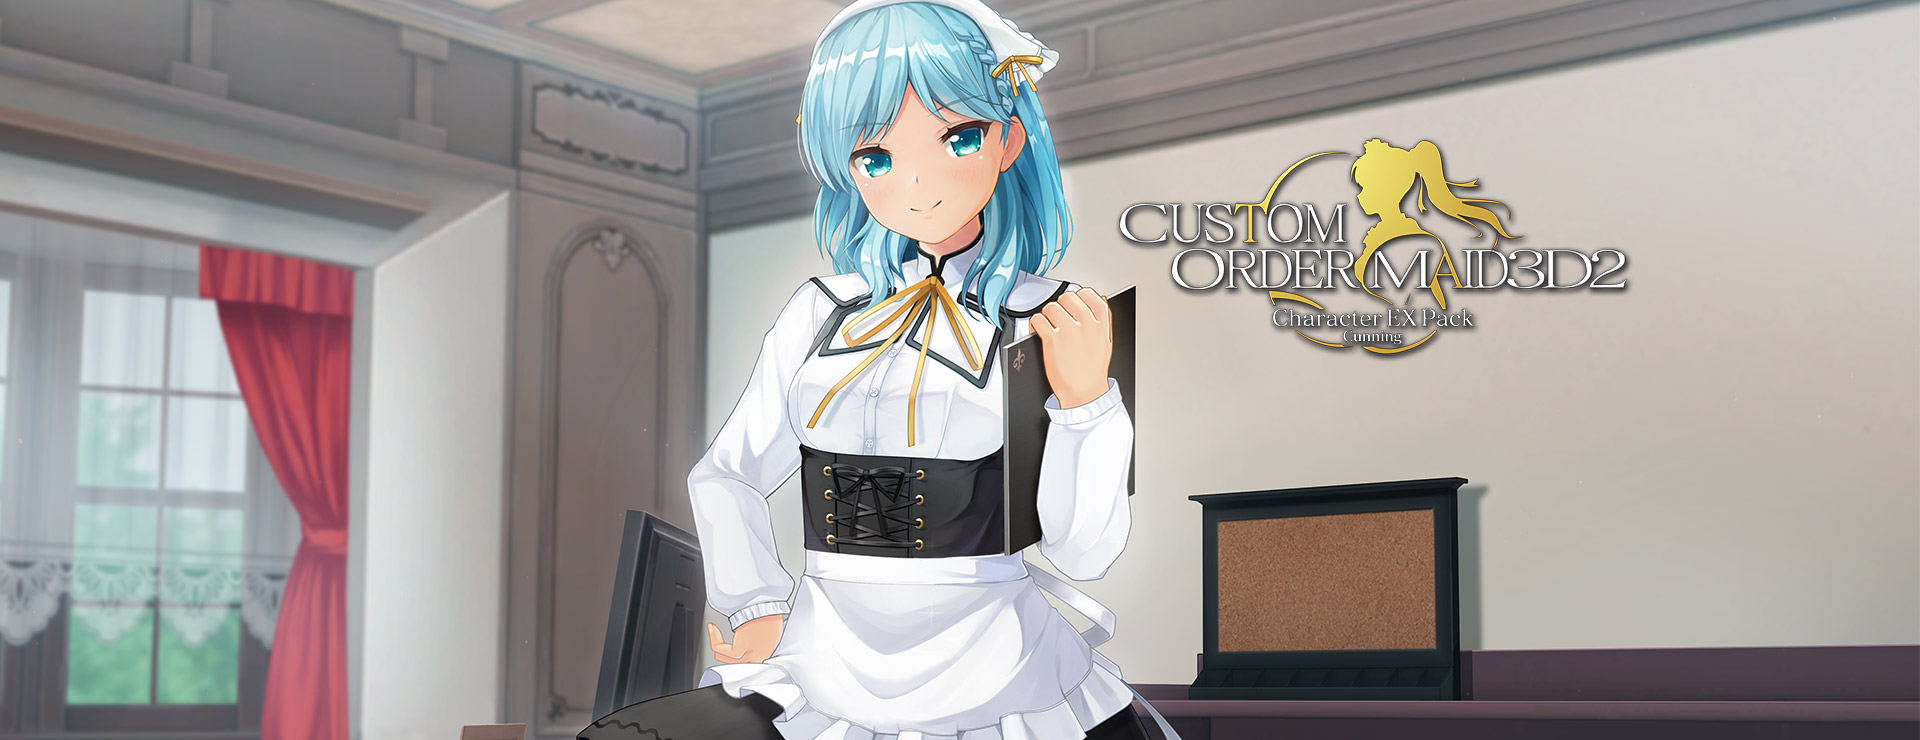 Custom Order Maid 3D: Character EX Pack Cunning - Simulation Spiel